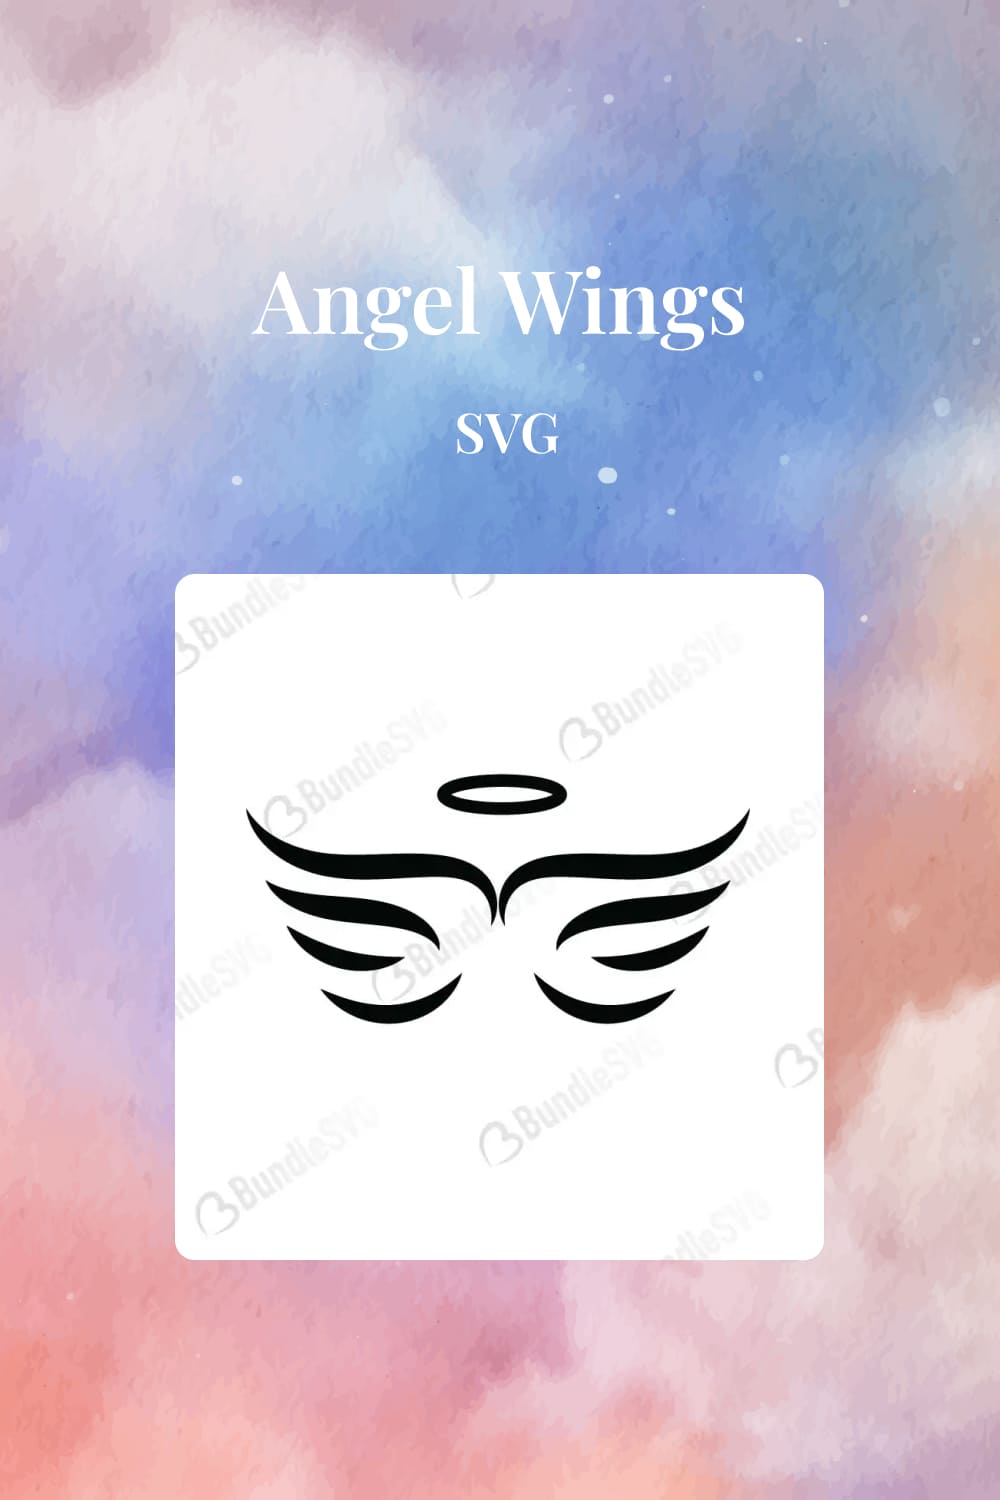 An image of a minimalist silhouette of angel wings.